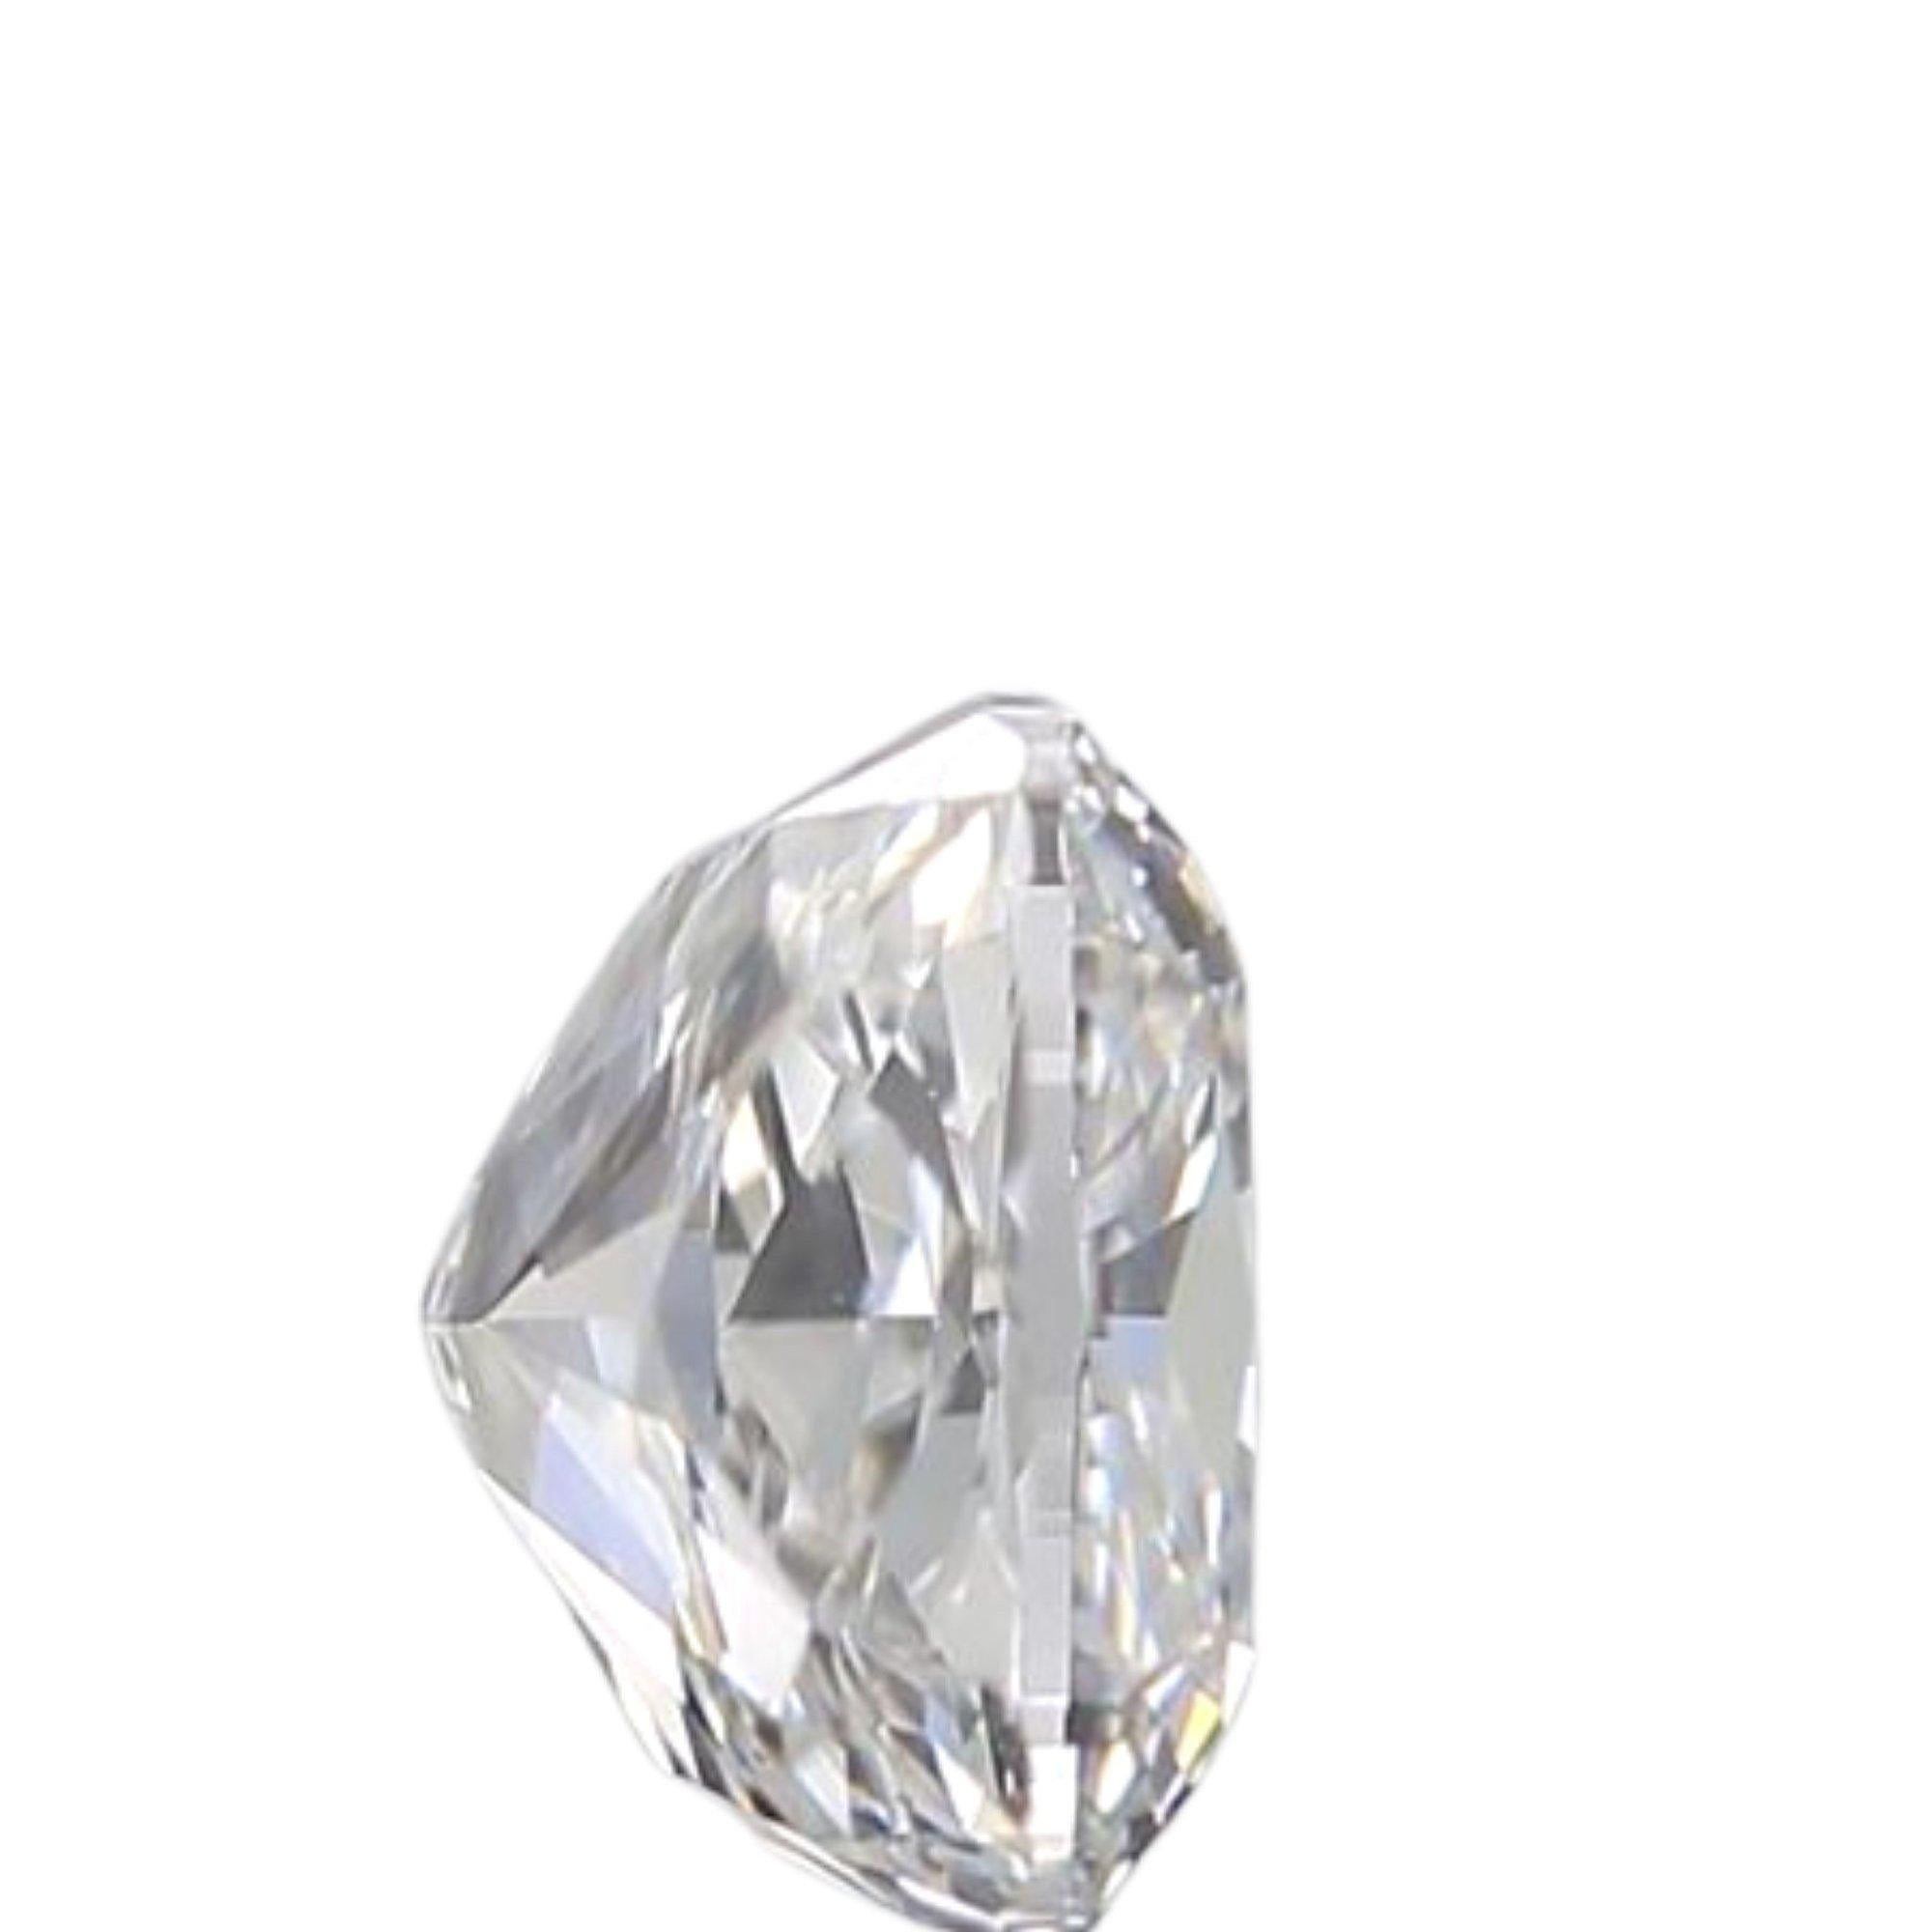 Natural and Ideal cut Cushion diamond in a 0.42 carat E VS1 grading 
. This diamond comes with GIA Certificate and laser inscription number.

GIA 2428386494

Sku: PT-995